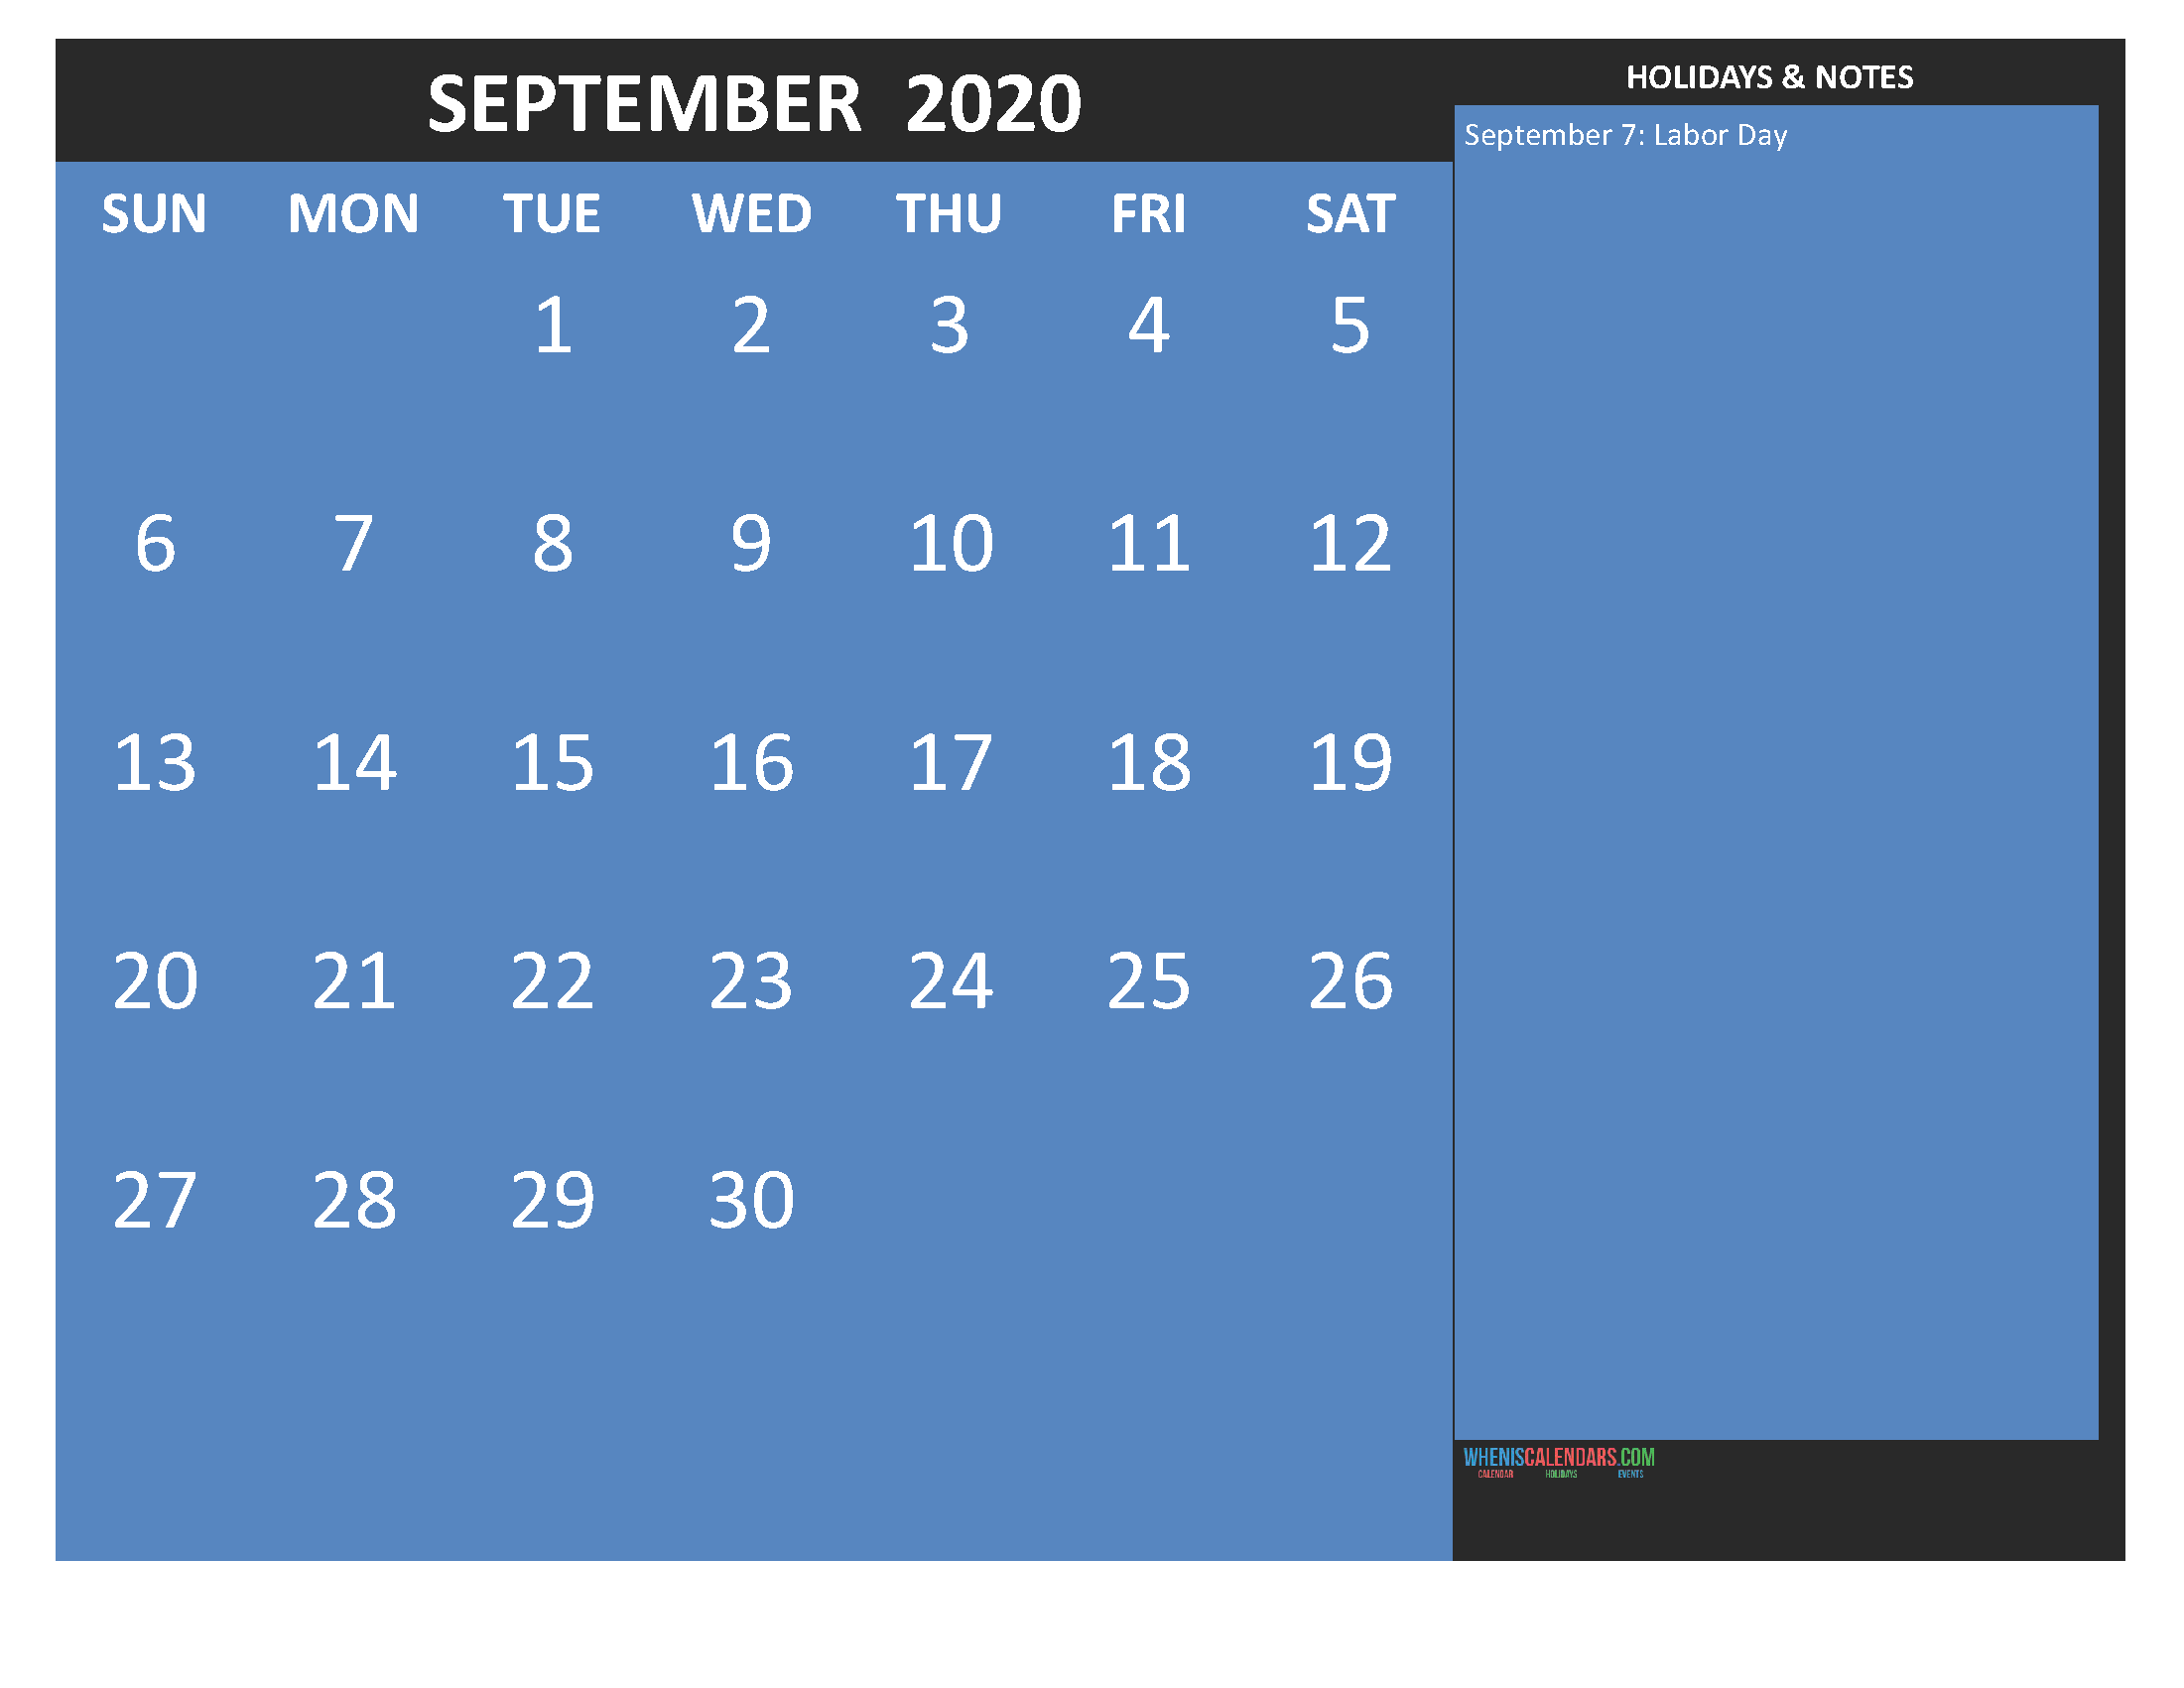 Free Printable Monthly Calendar 2020 September with Holidays